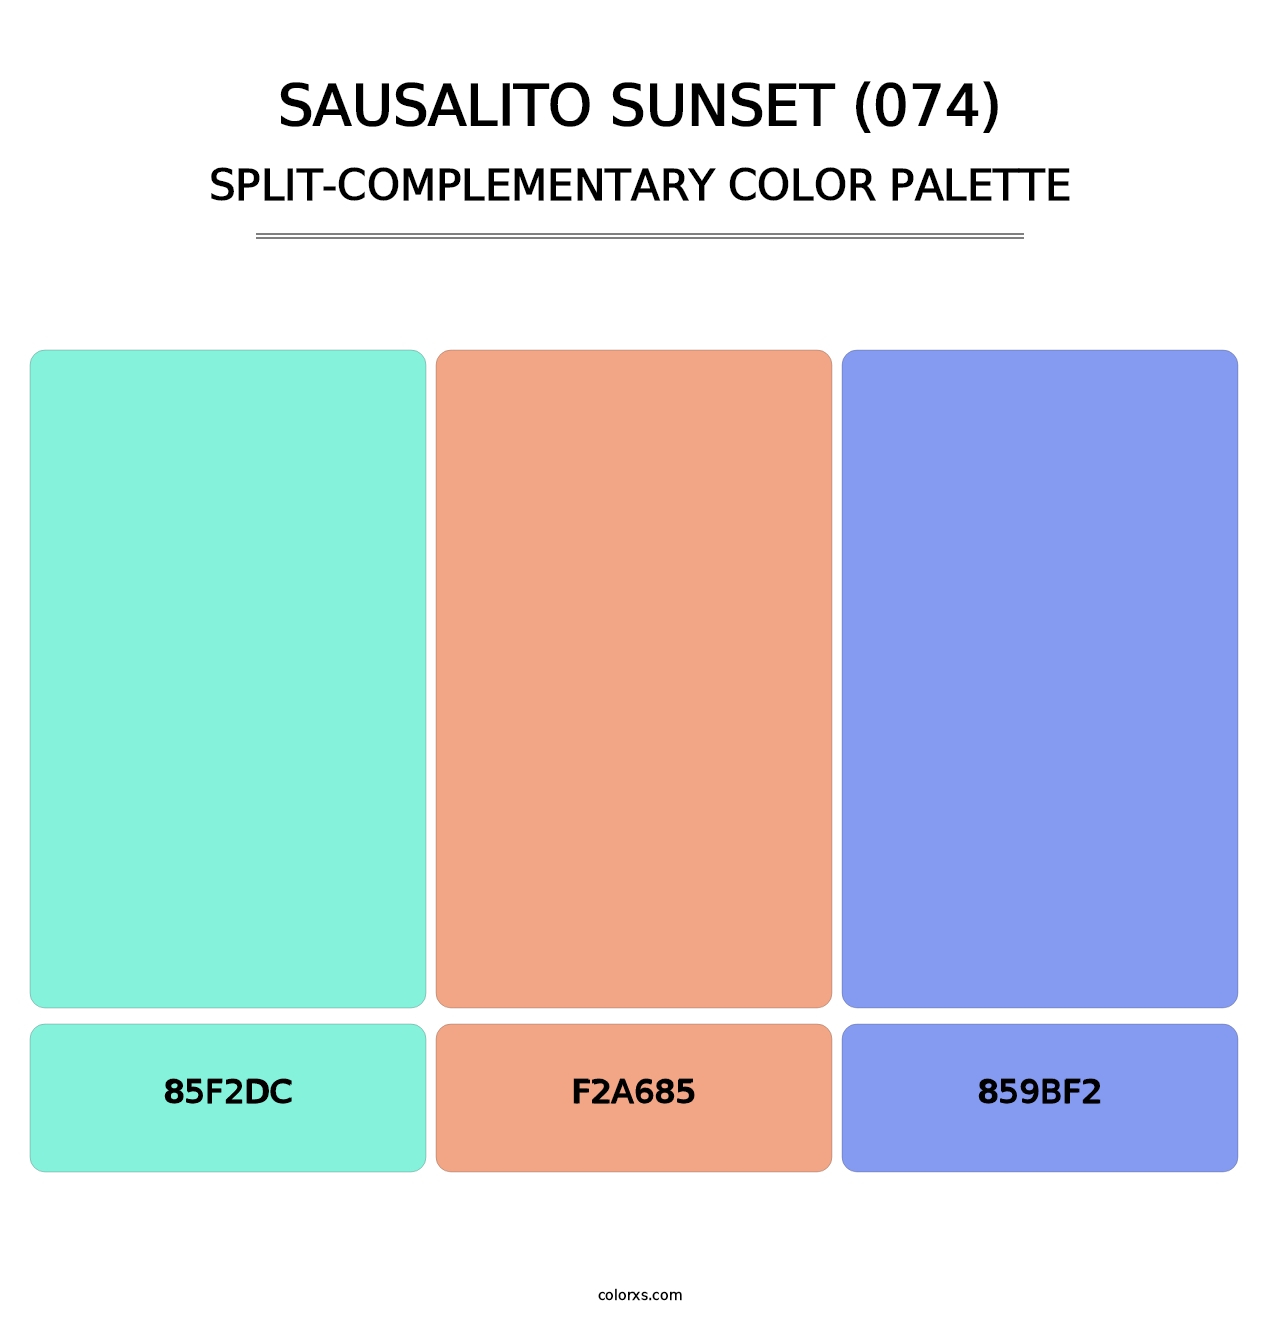 Sausalito Sunset (074) - Split-Complementary Color Palette